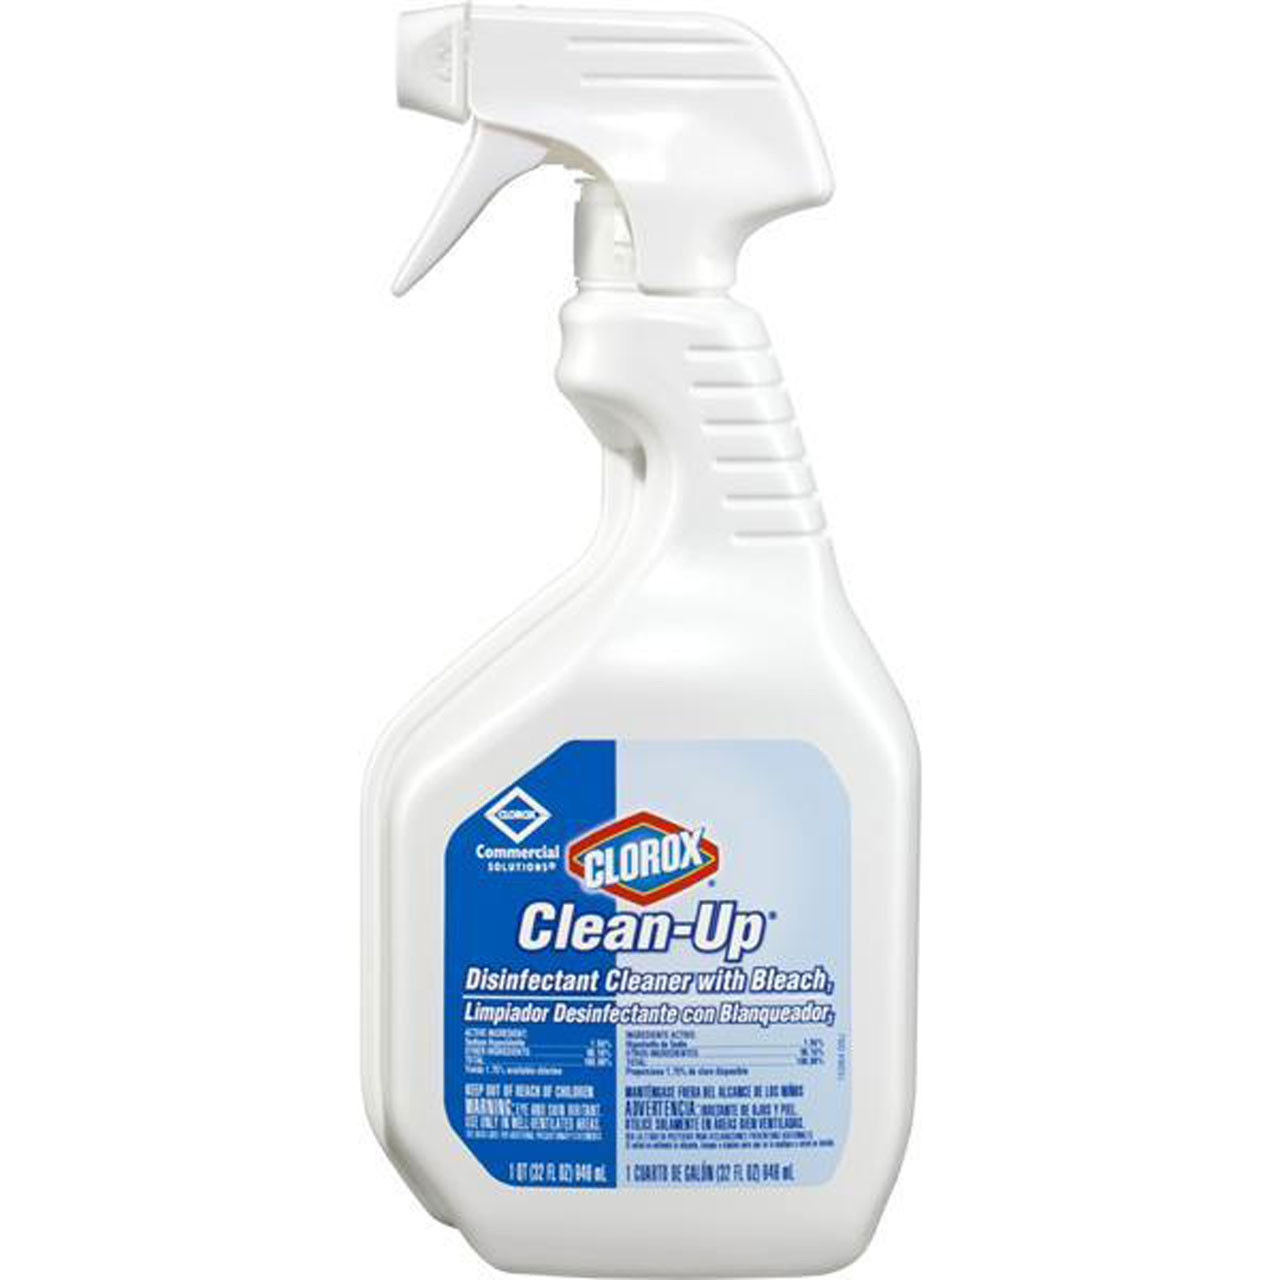 What sizes are the Clorox Clean-Up disinfectant spray cleaner with bleach?